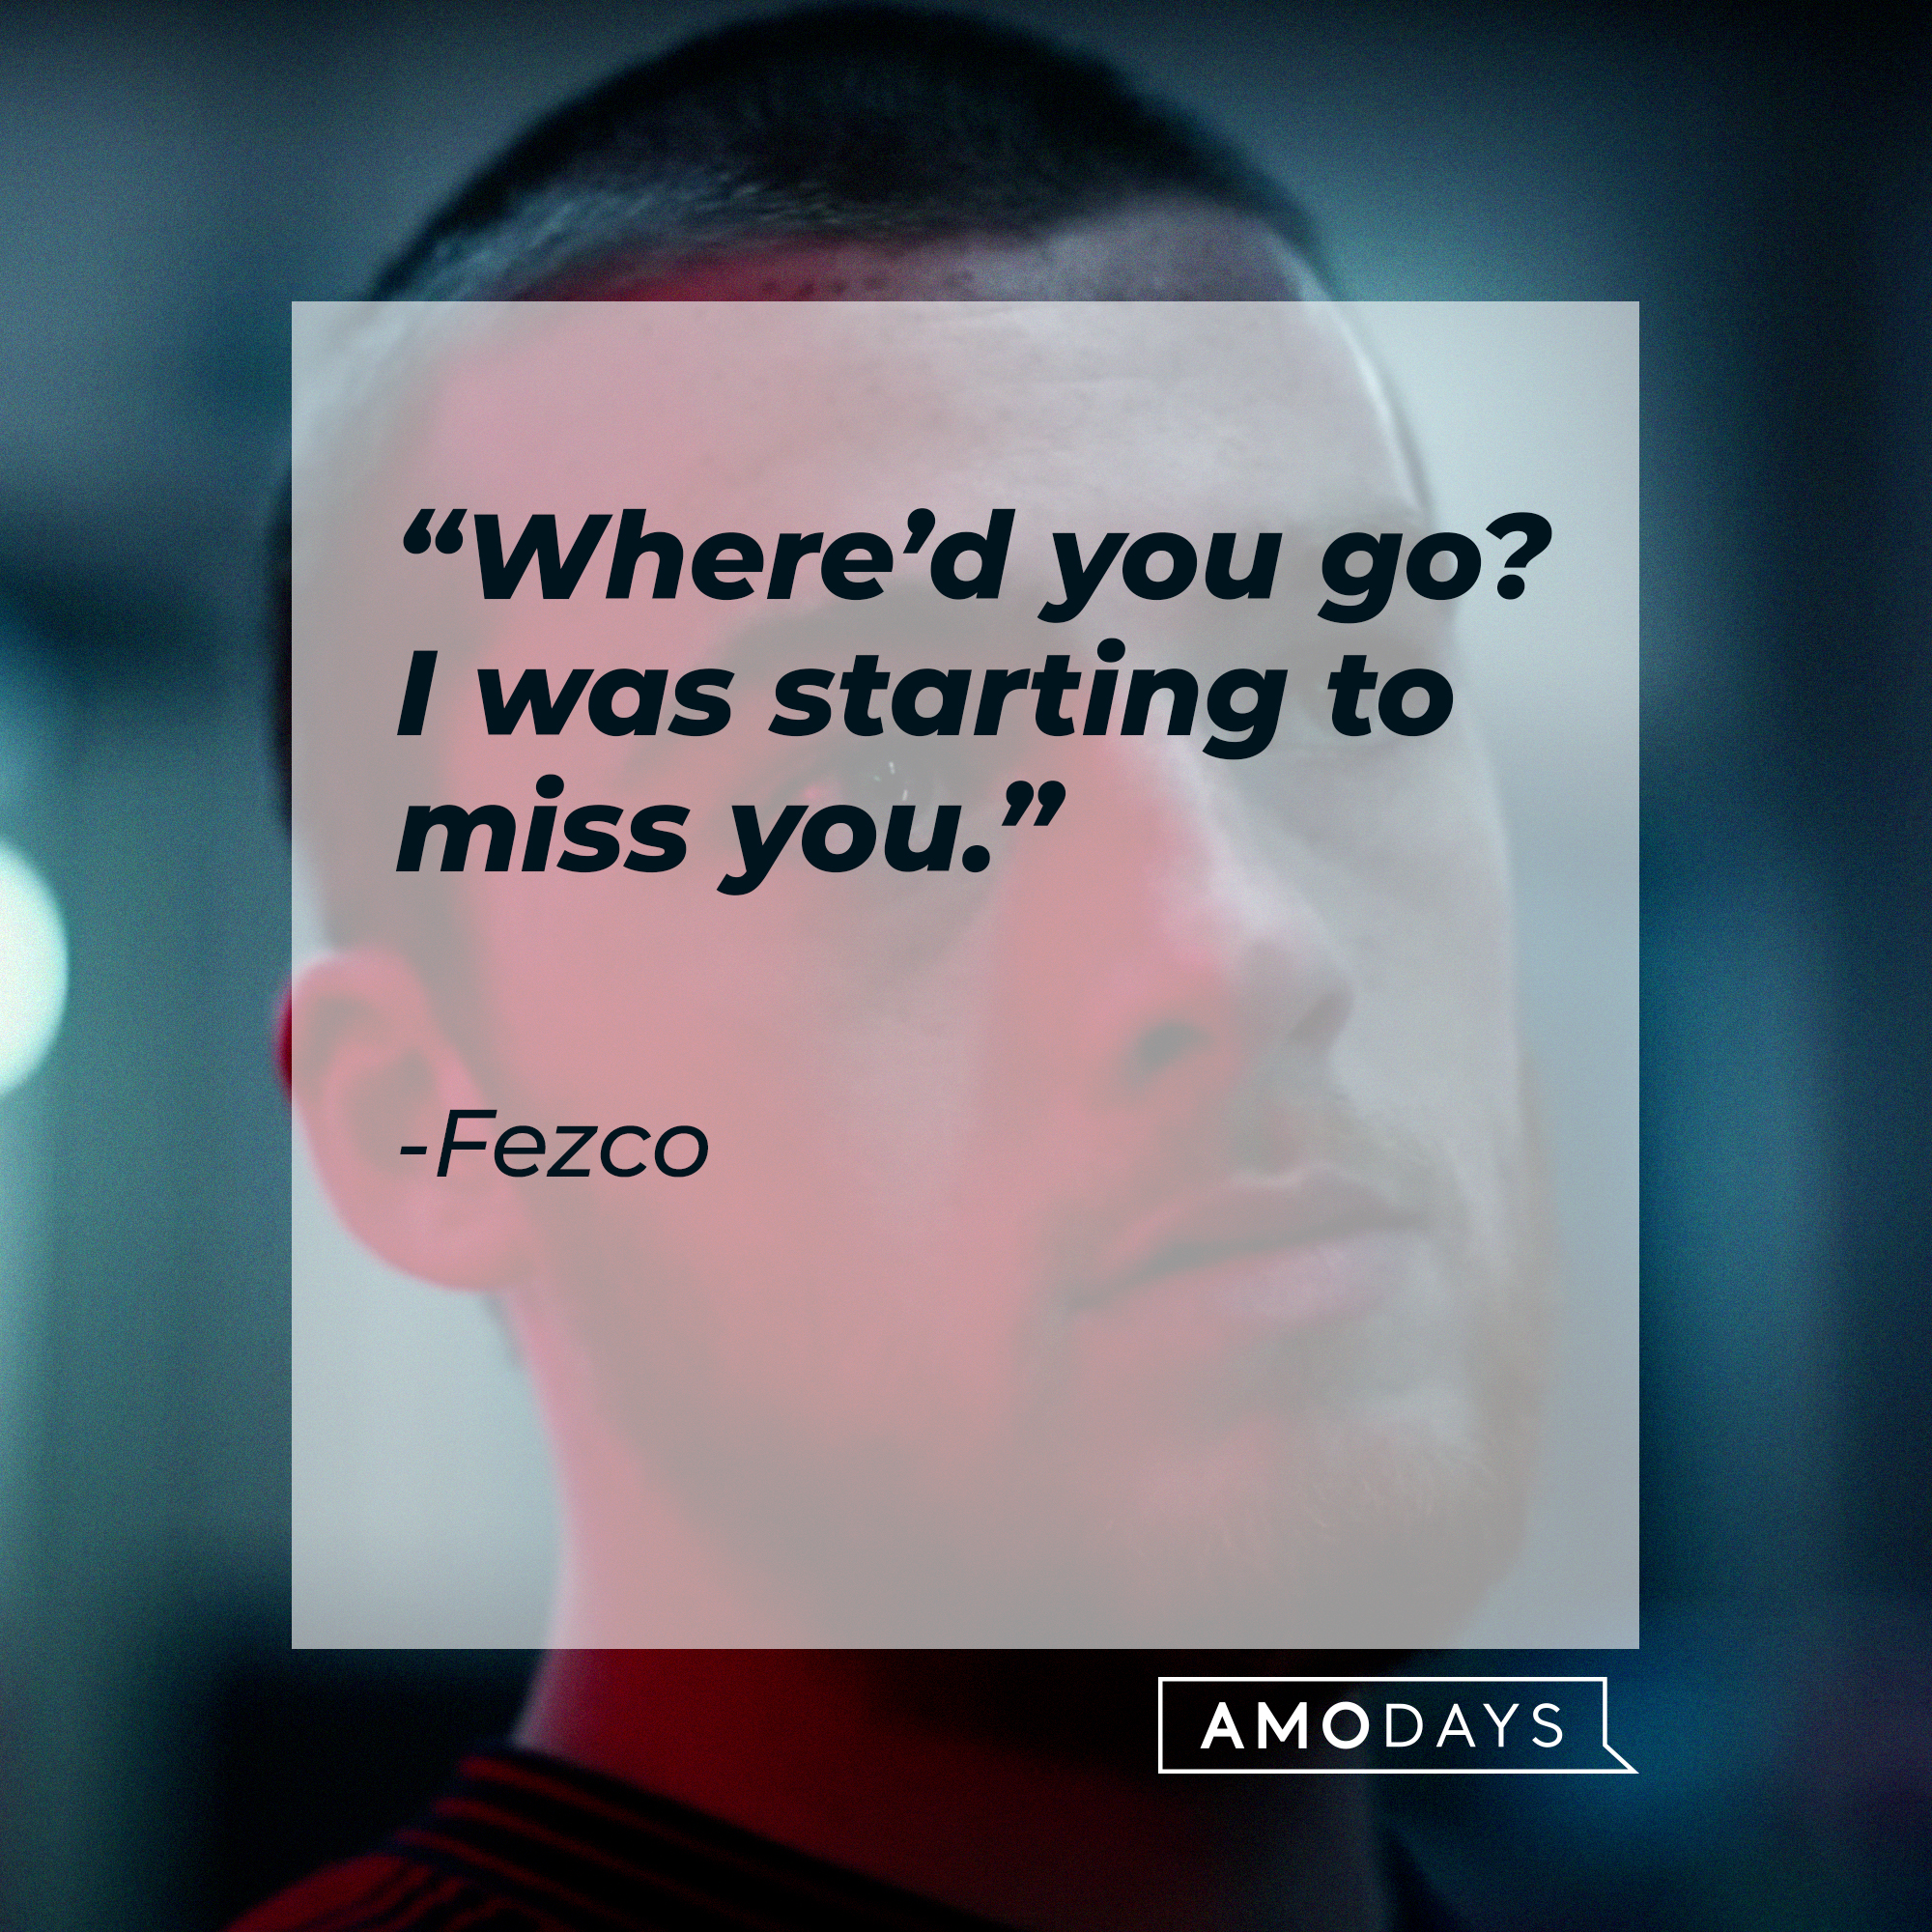 Fezco with this quote: “Where’d you go? I was starting to miss you.” | Source: youtube.com/EuphoriaHBO